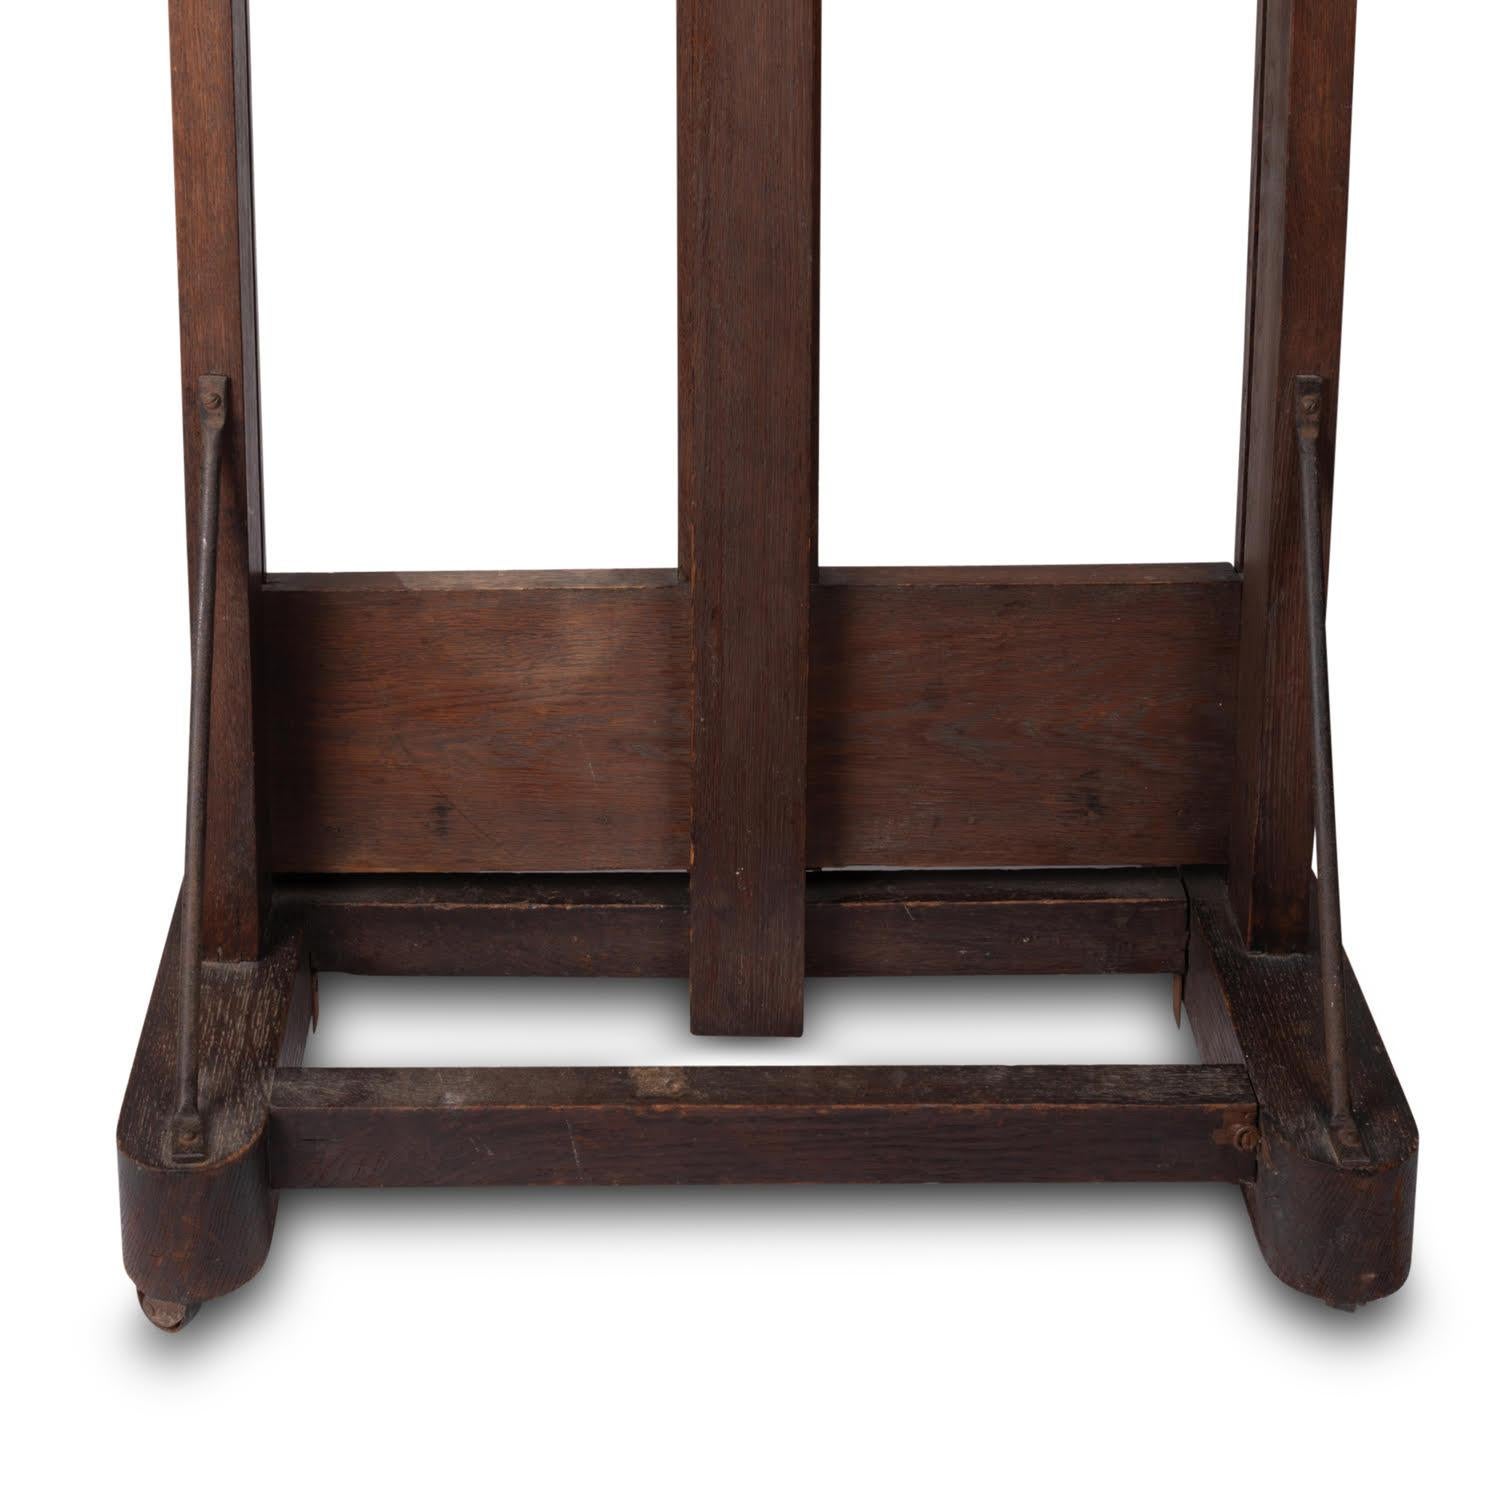 Painter's Easel with Castors, Early 20th Century. 1